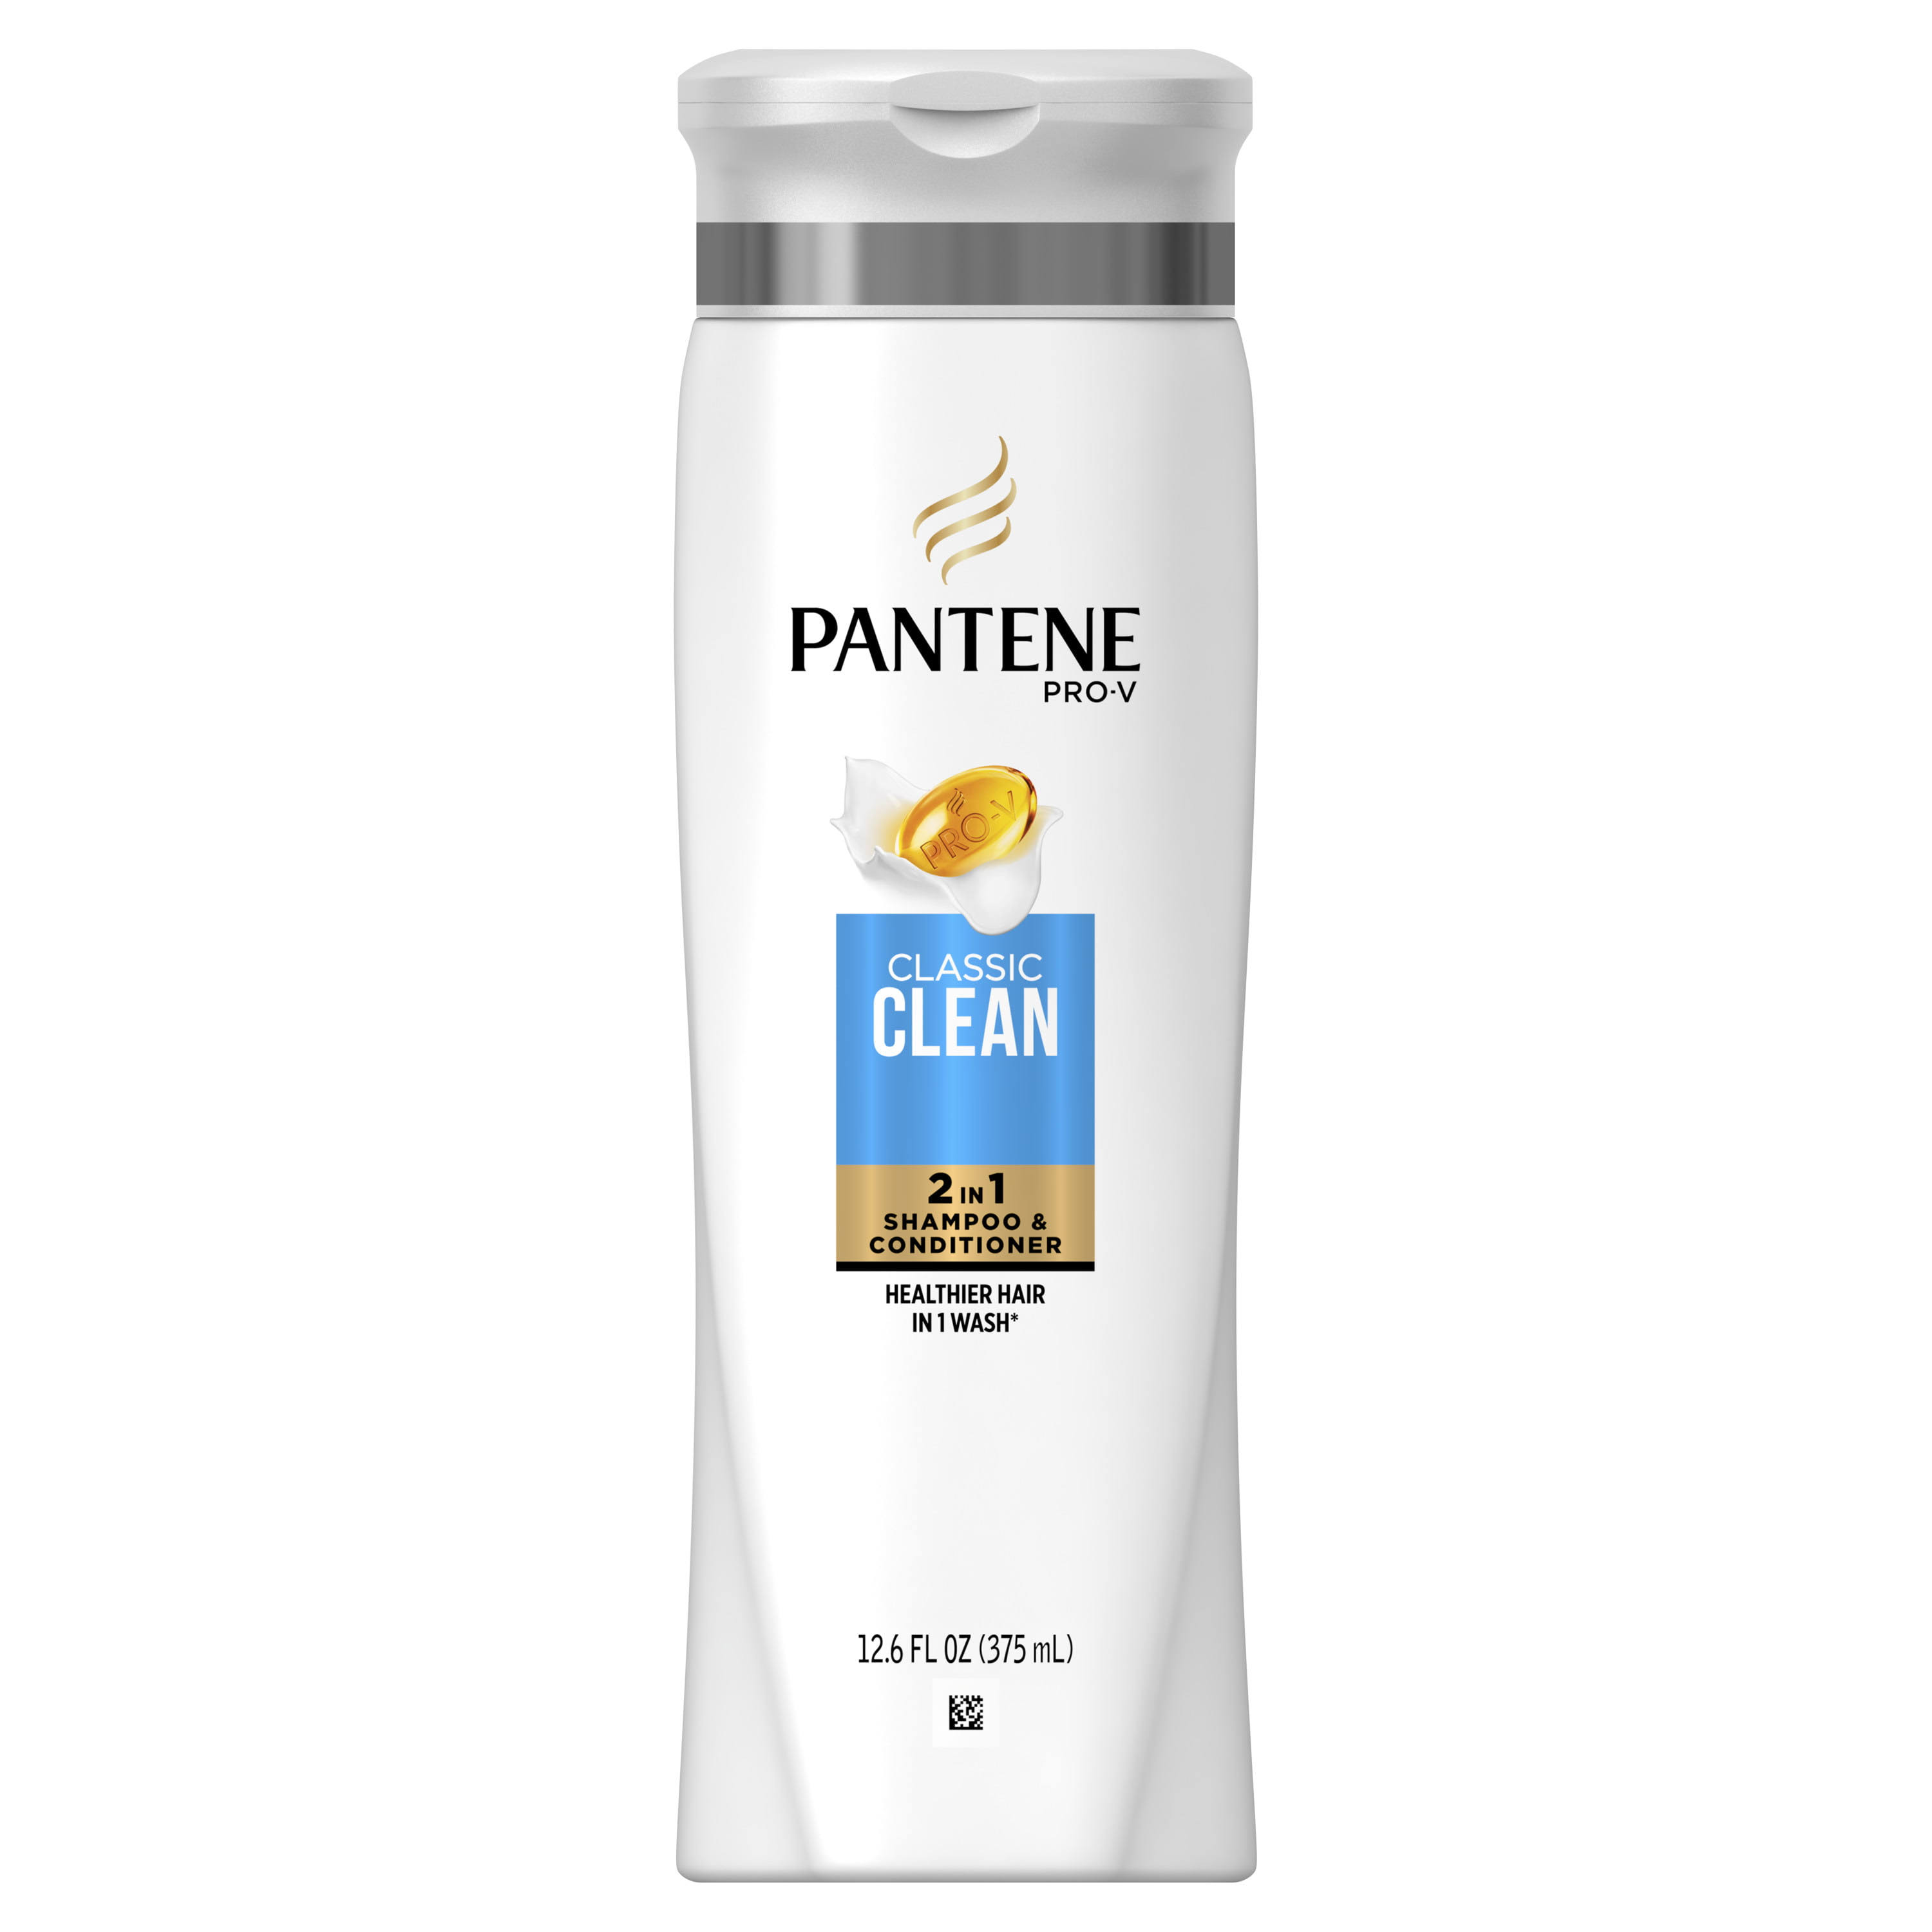 Pantene Pro-V Dreamcare Classic Clean 2 in 1 Shampoo and Conditioner - 12.6oz